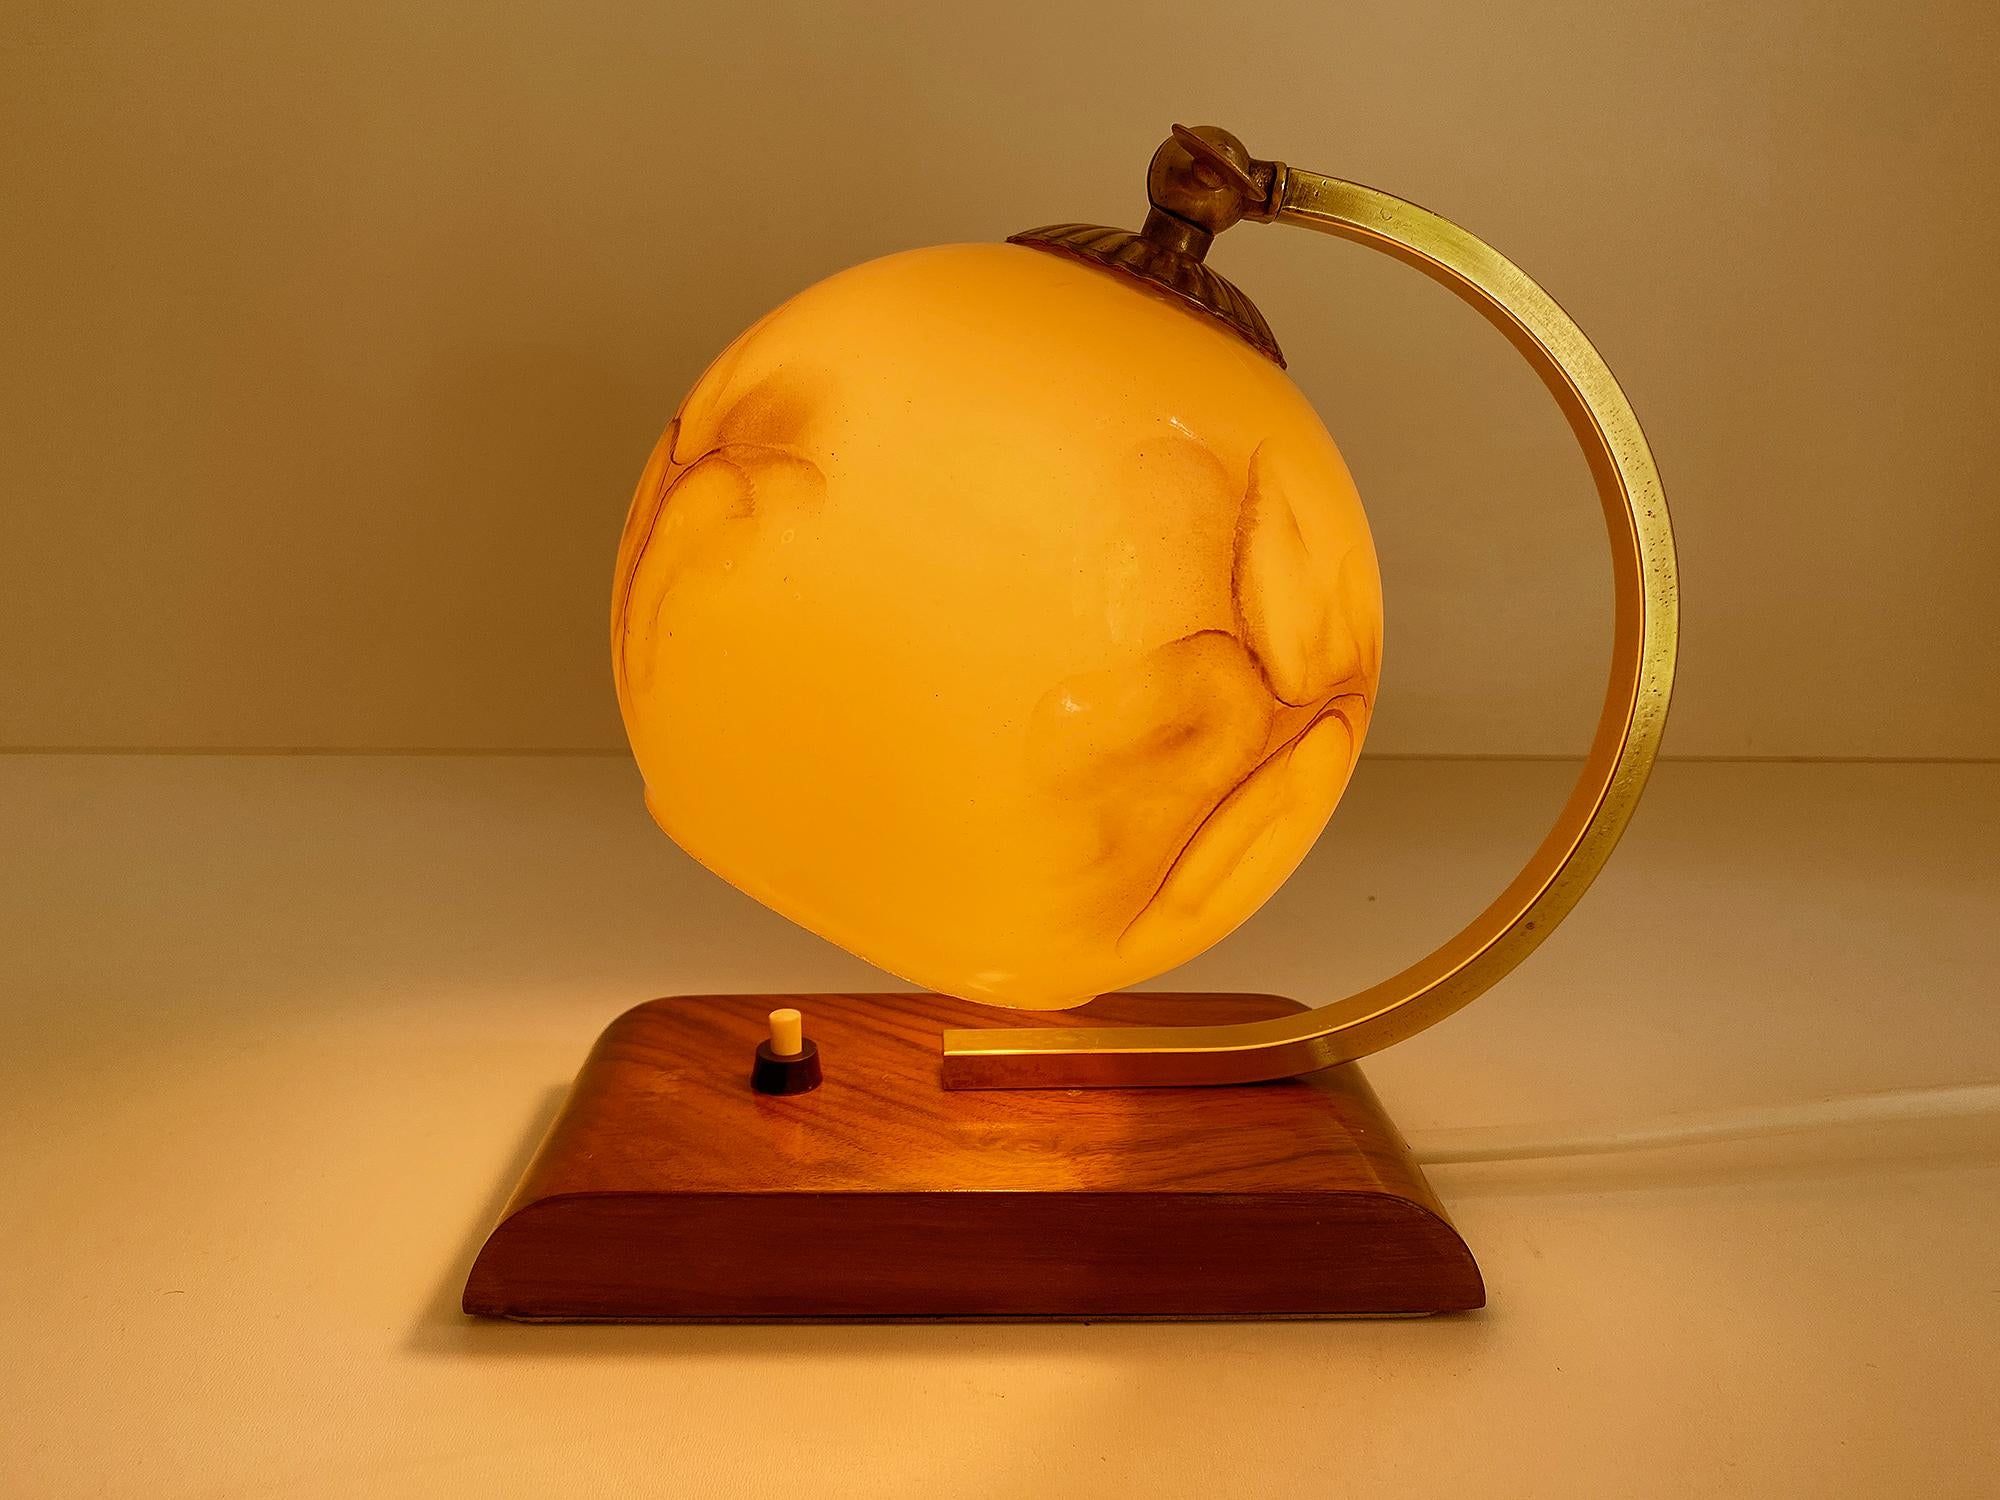 Art Deco Bauhaus table lamp featuring a streamlined wooden base, half circle brass cradle and marbleized opaline glass shade, 1930s  The shade’s angle can be adjusted. - fully rewired - The lamp has been tested with US American light bulbs under